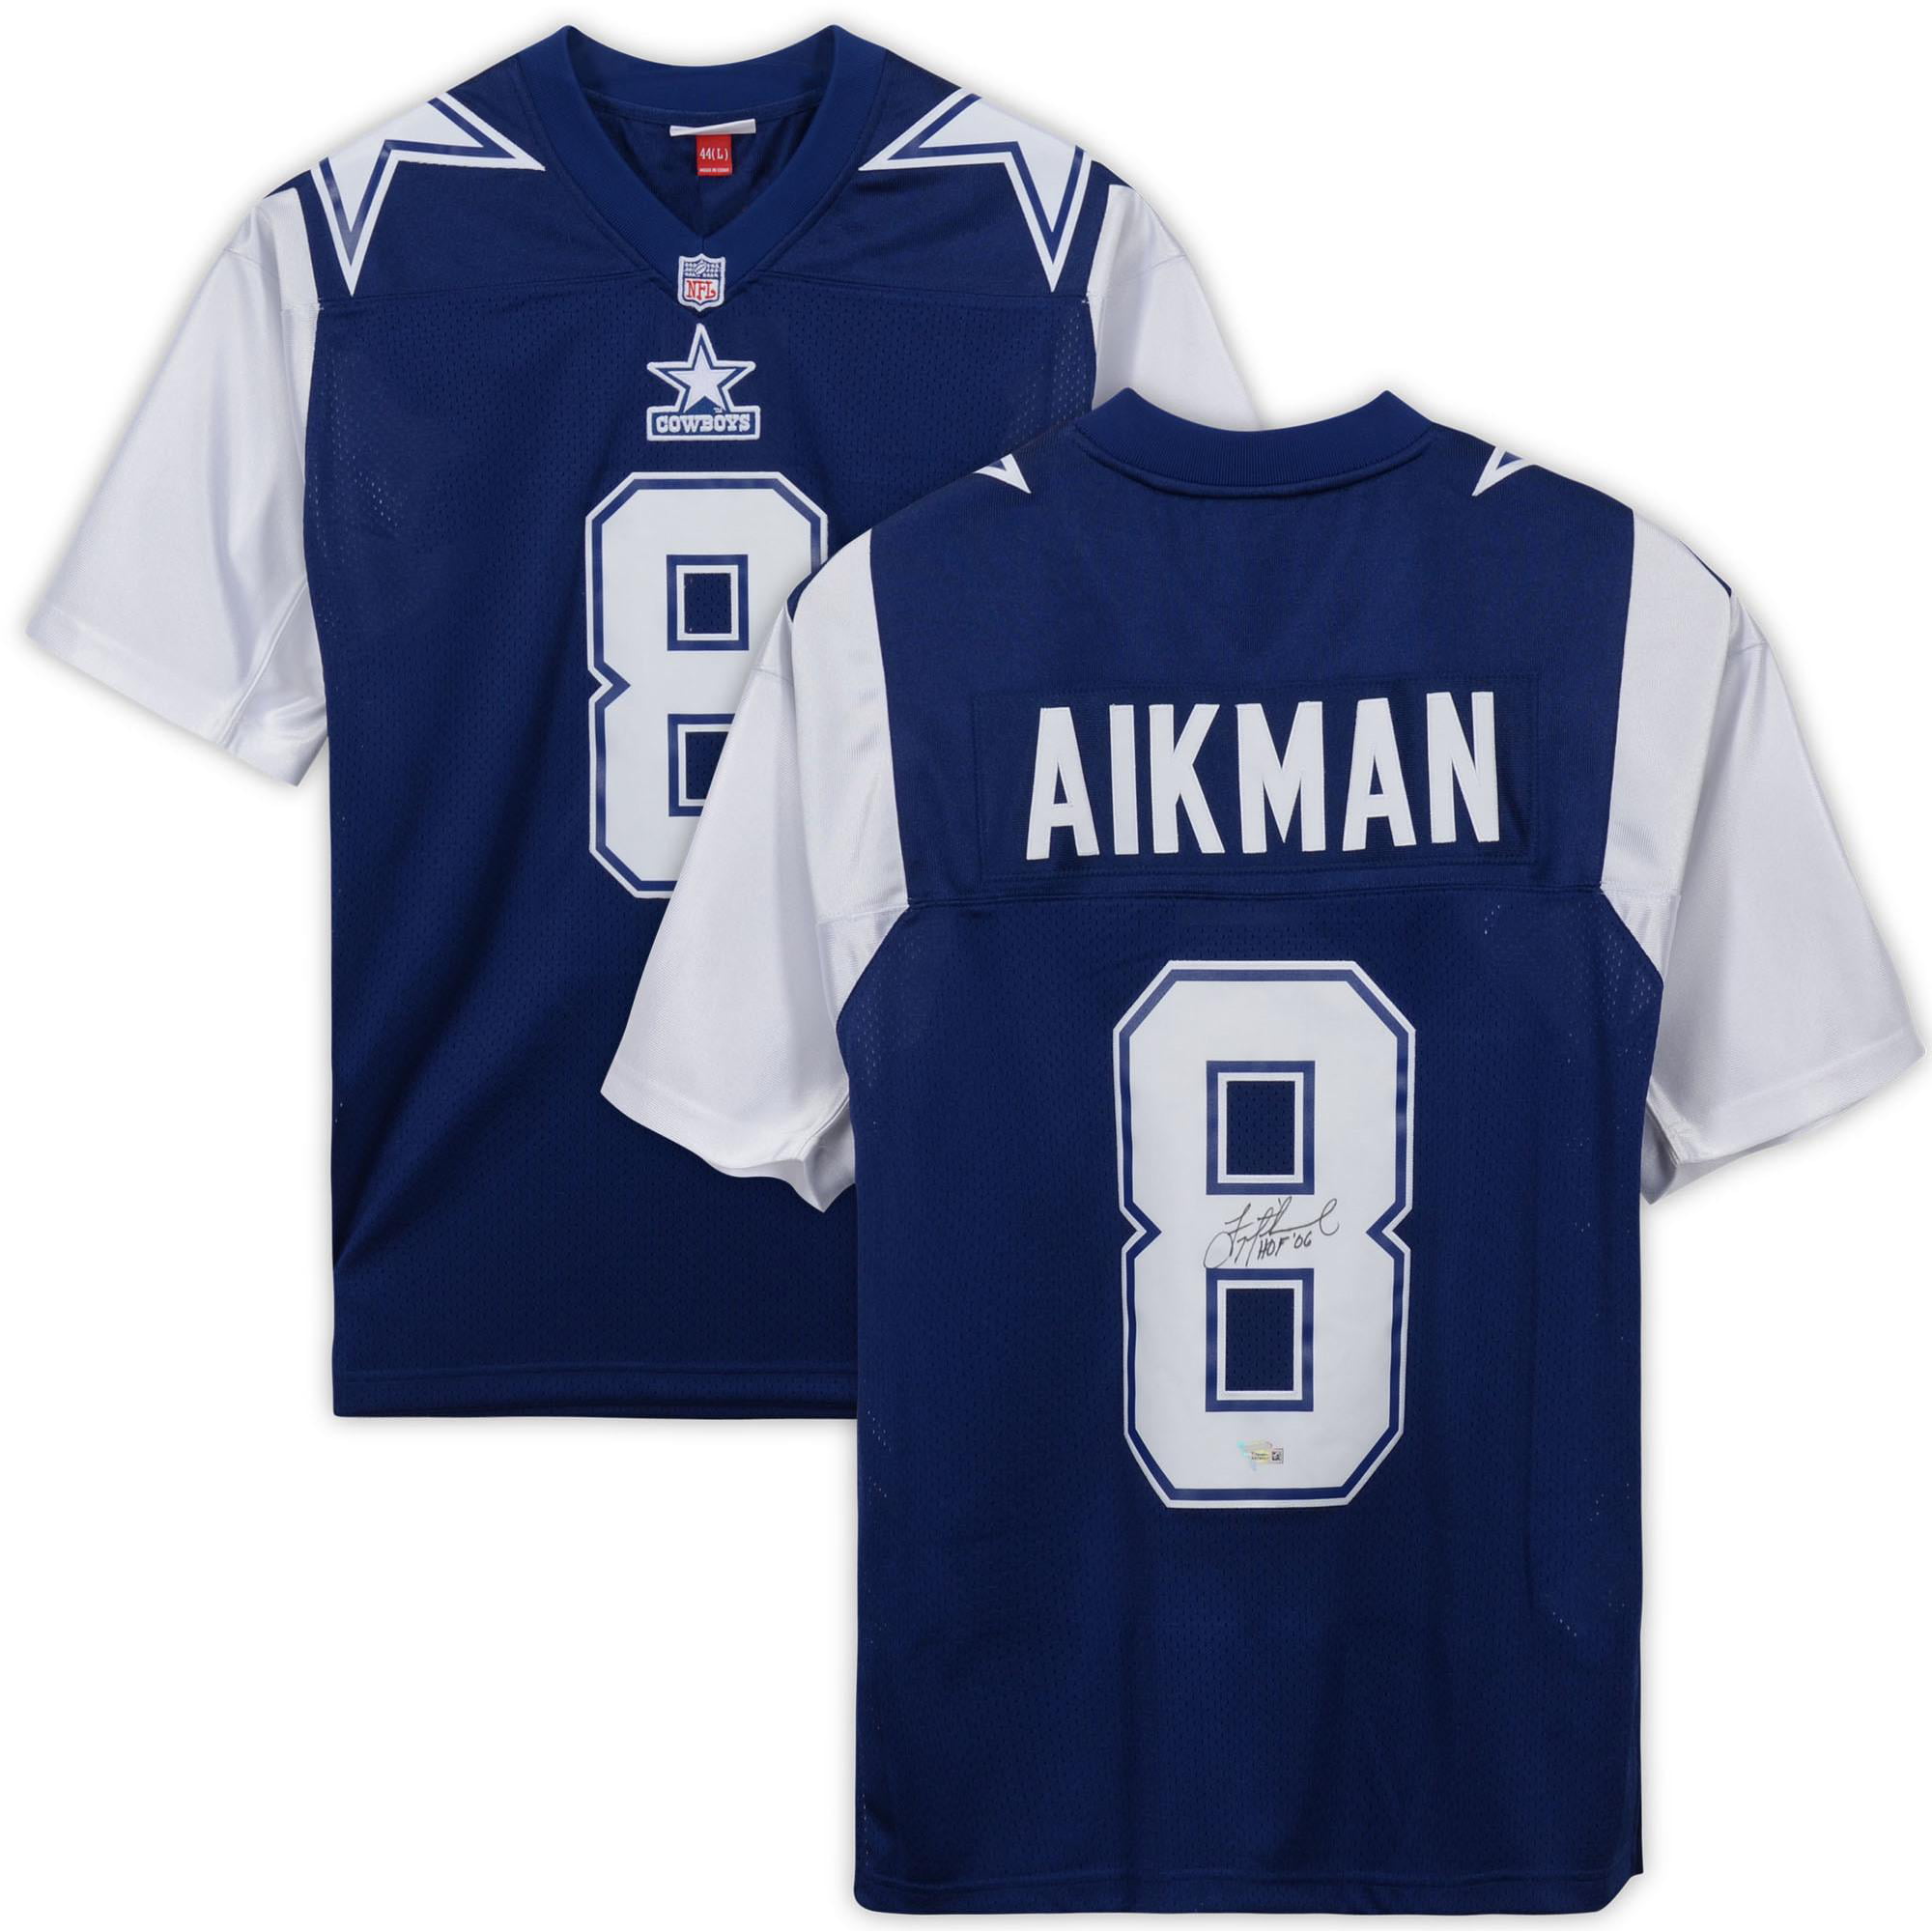 troy aikman mitchell and ness jersey